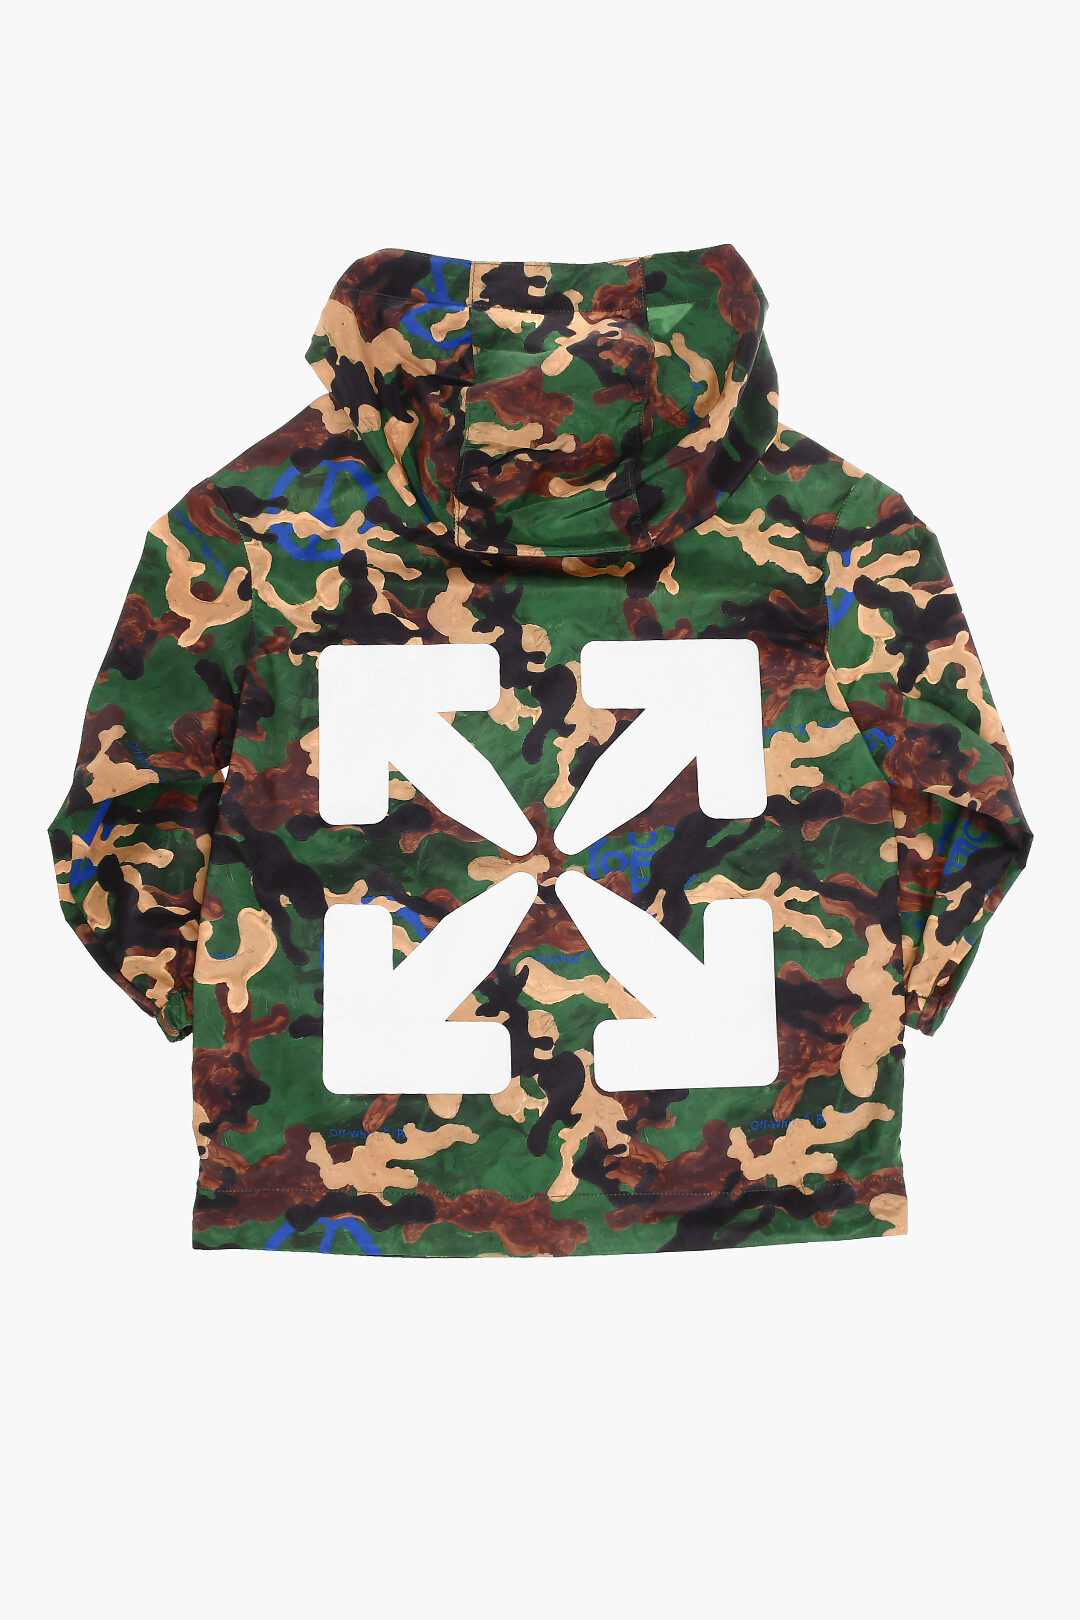 Kids Camouflage Windbreaker Jacket with Contrasting boys - Glamood Outlet